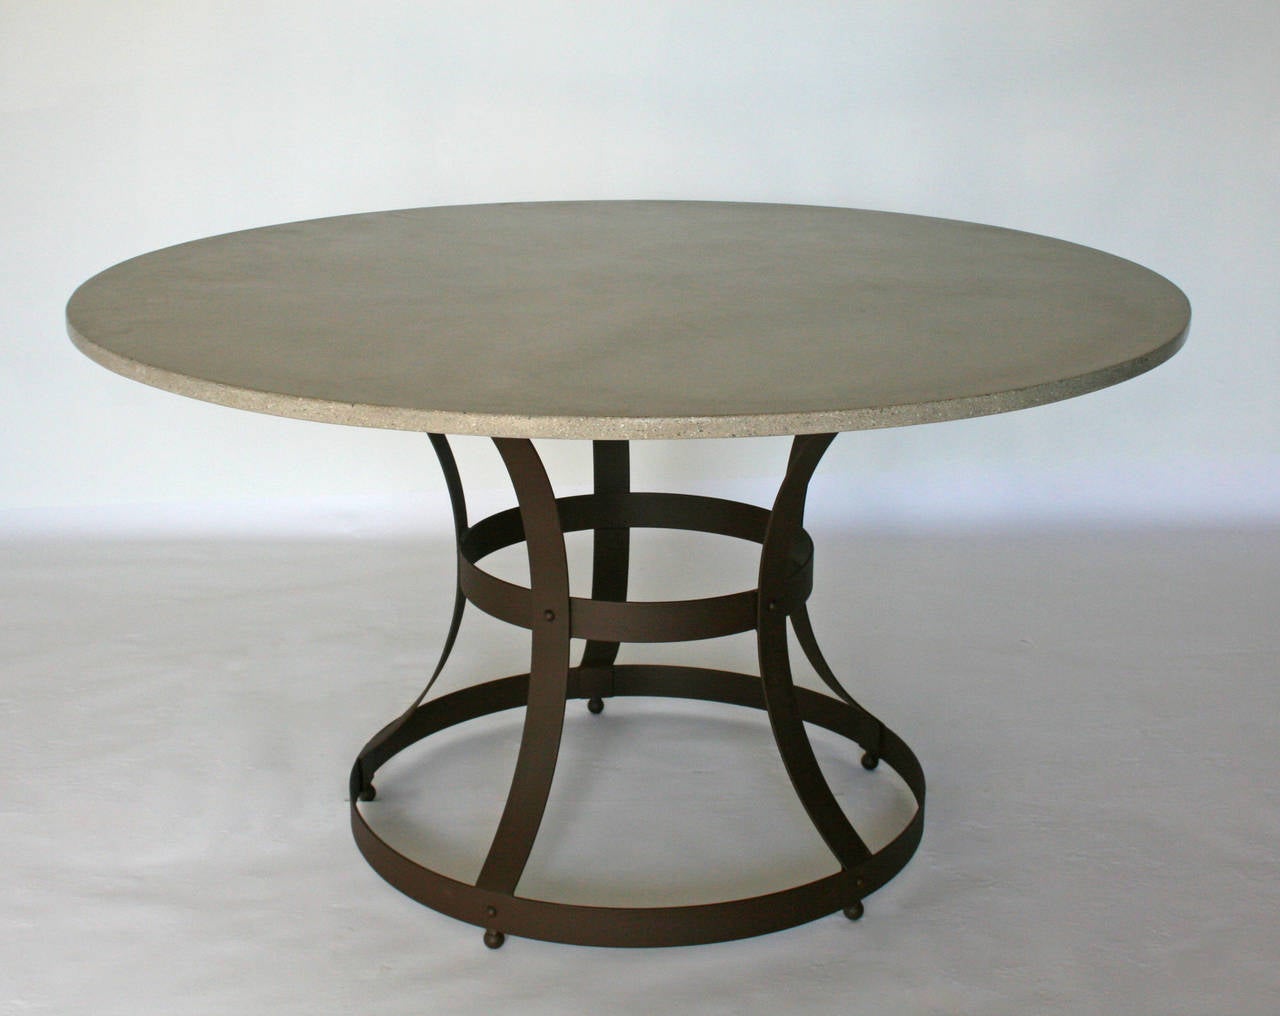 American James de Wulf Concrete Hourglass Dining Table, 72